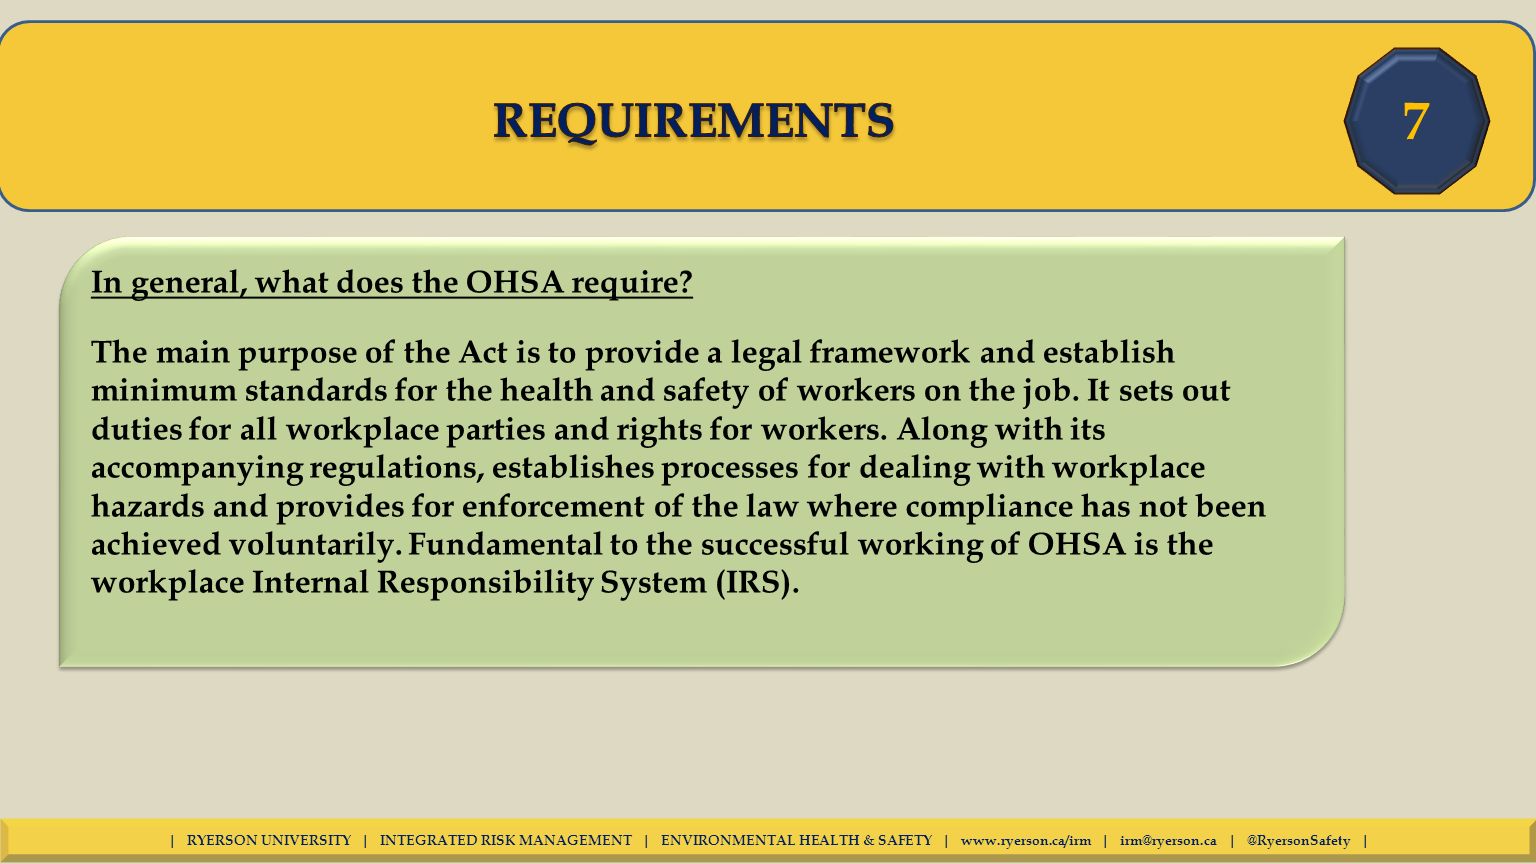 OSHA: Complying With Workplace Health and Safety Laws